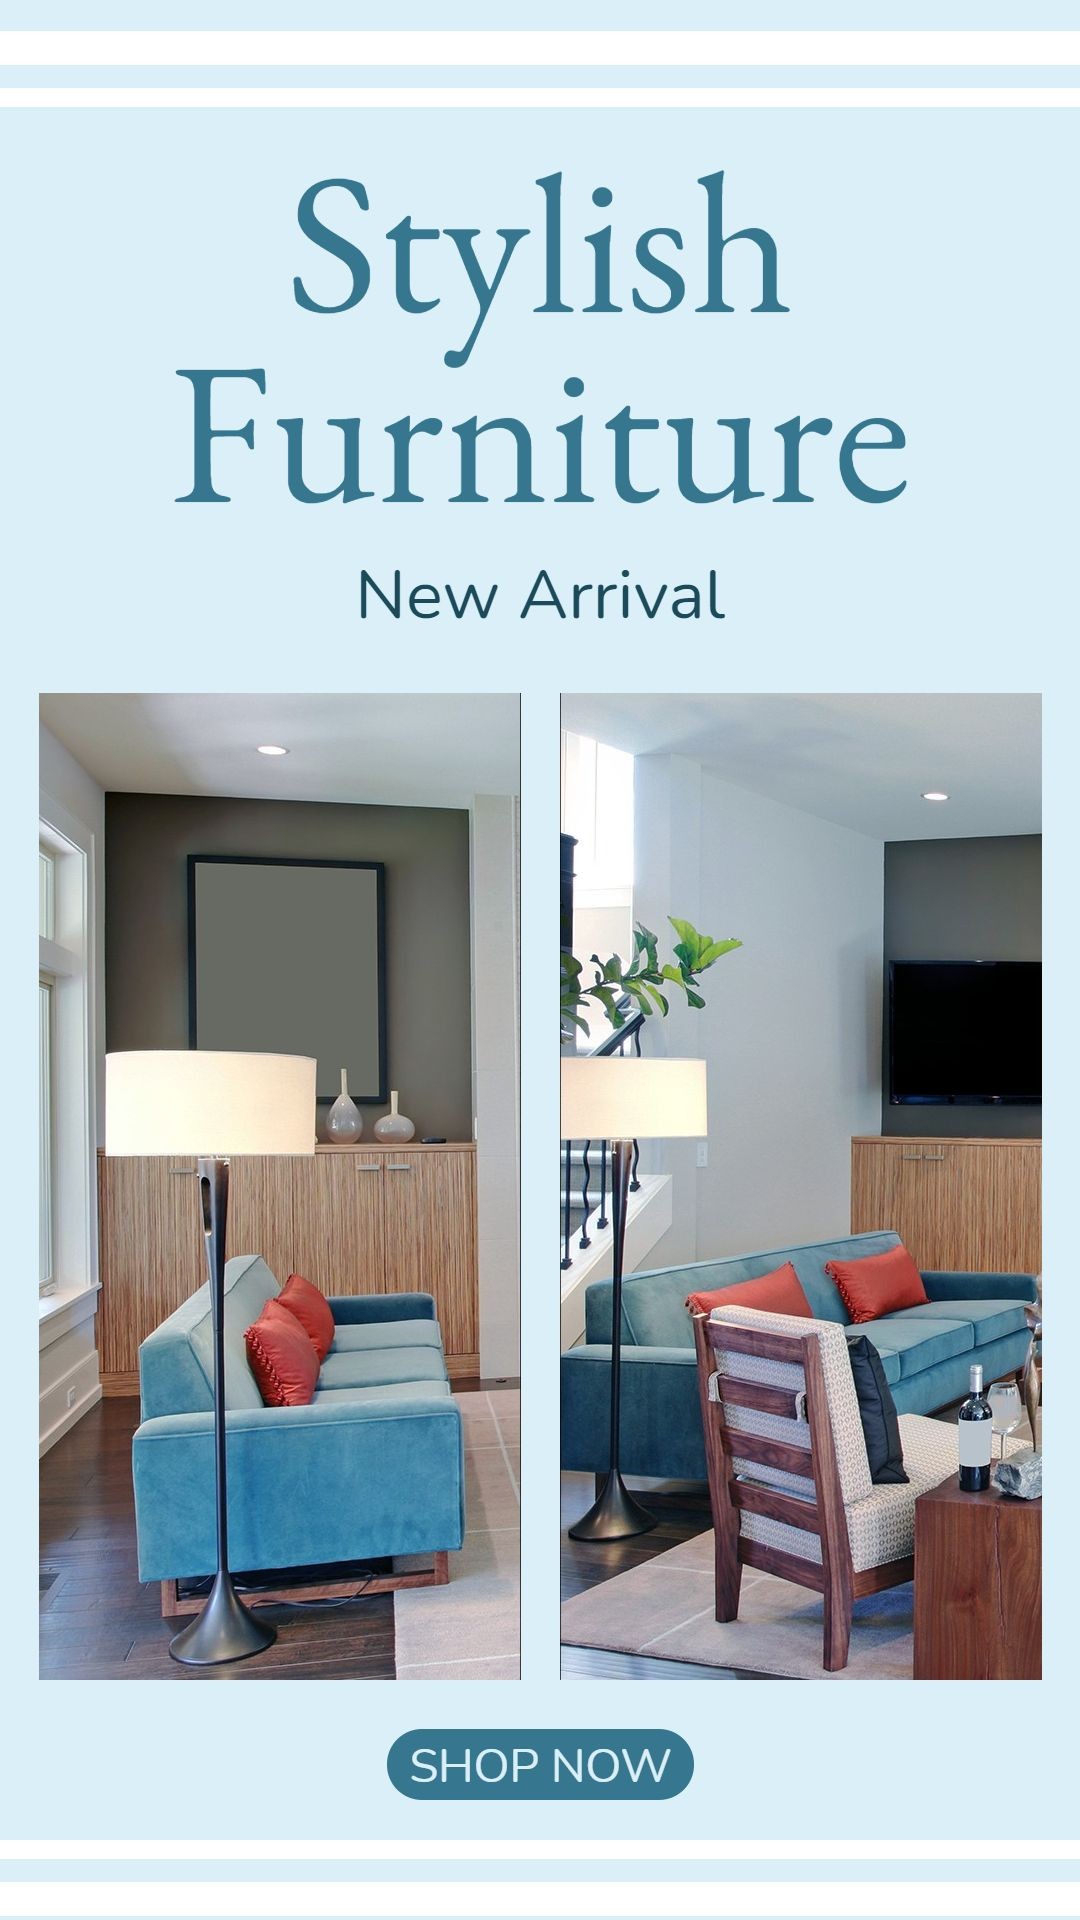 Ellipse Element Simple Style Furniture New Product Arrival Promo Ecommerce Story预览效果